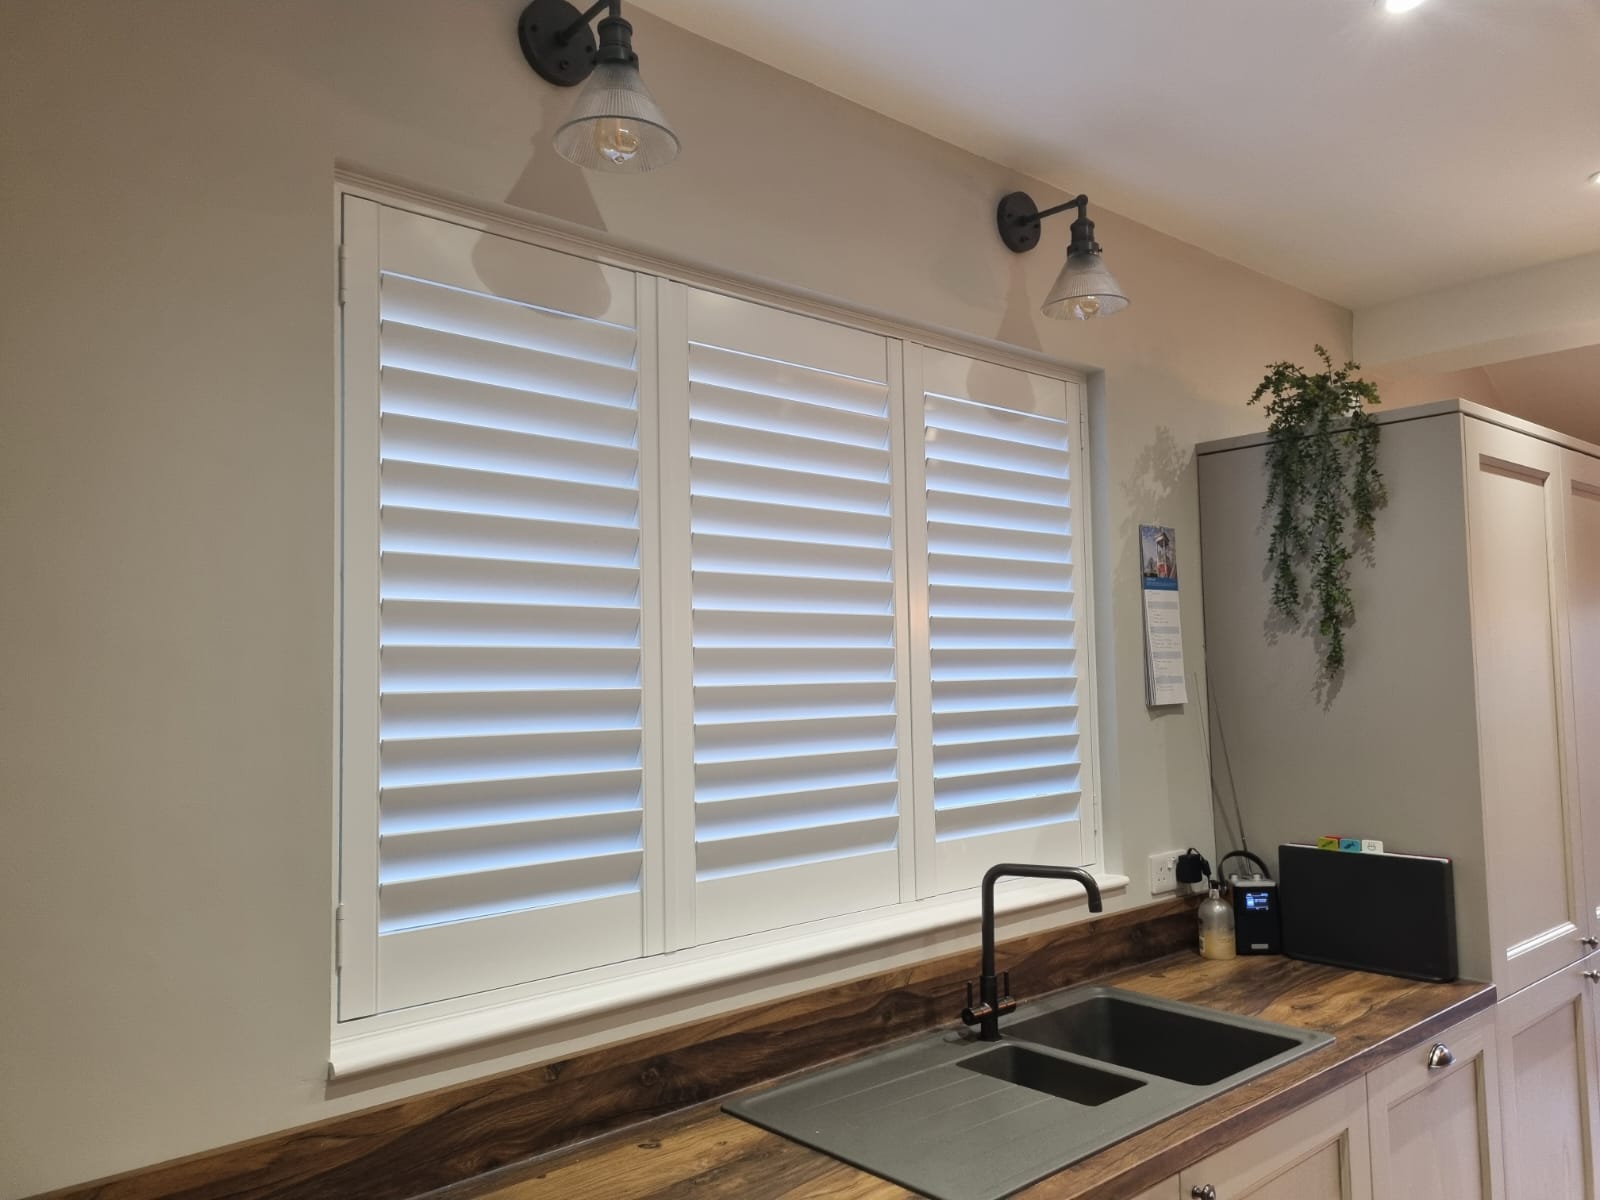 Image of plantation shutters in a modern kitchen